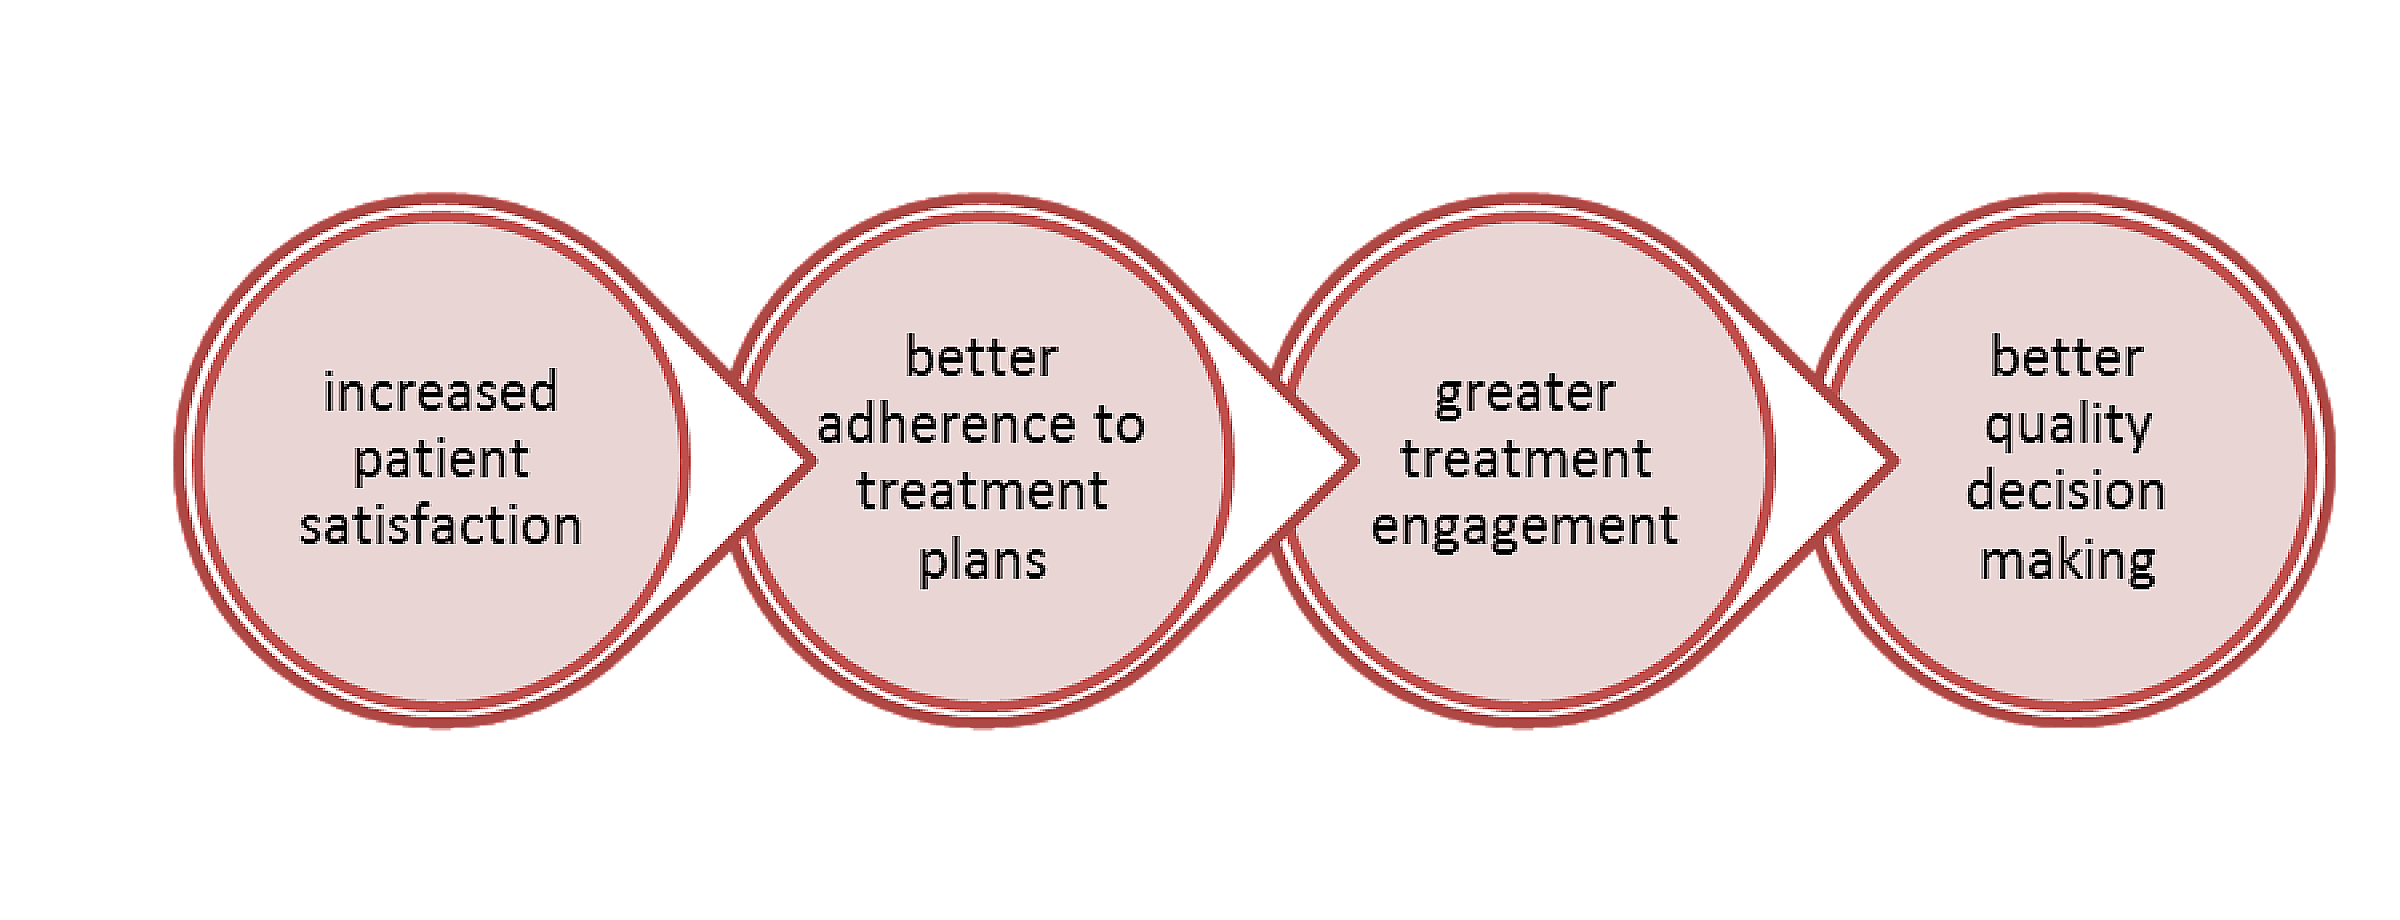 Benefits-Shared-decision-making-tools